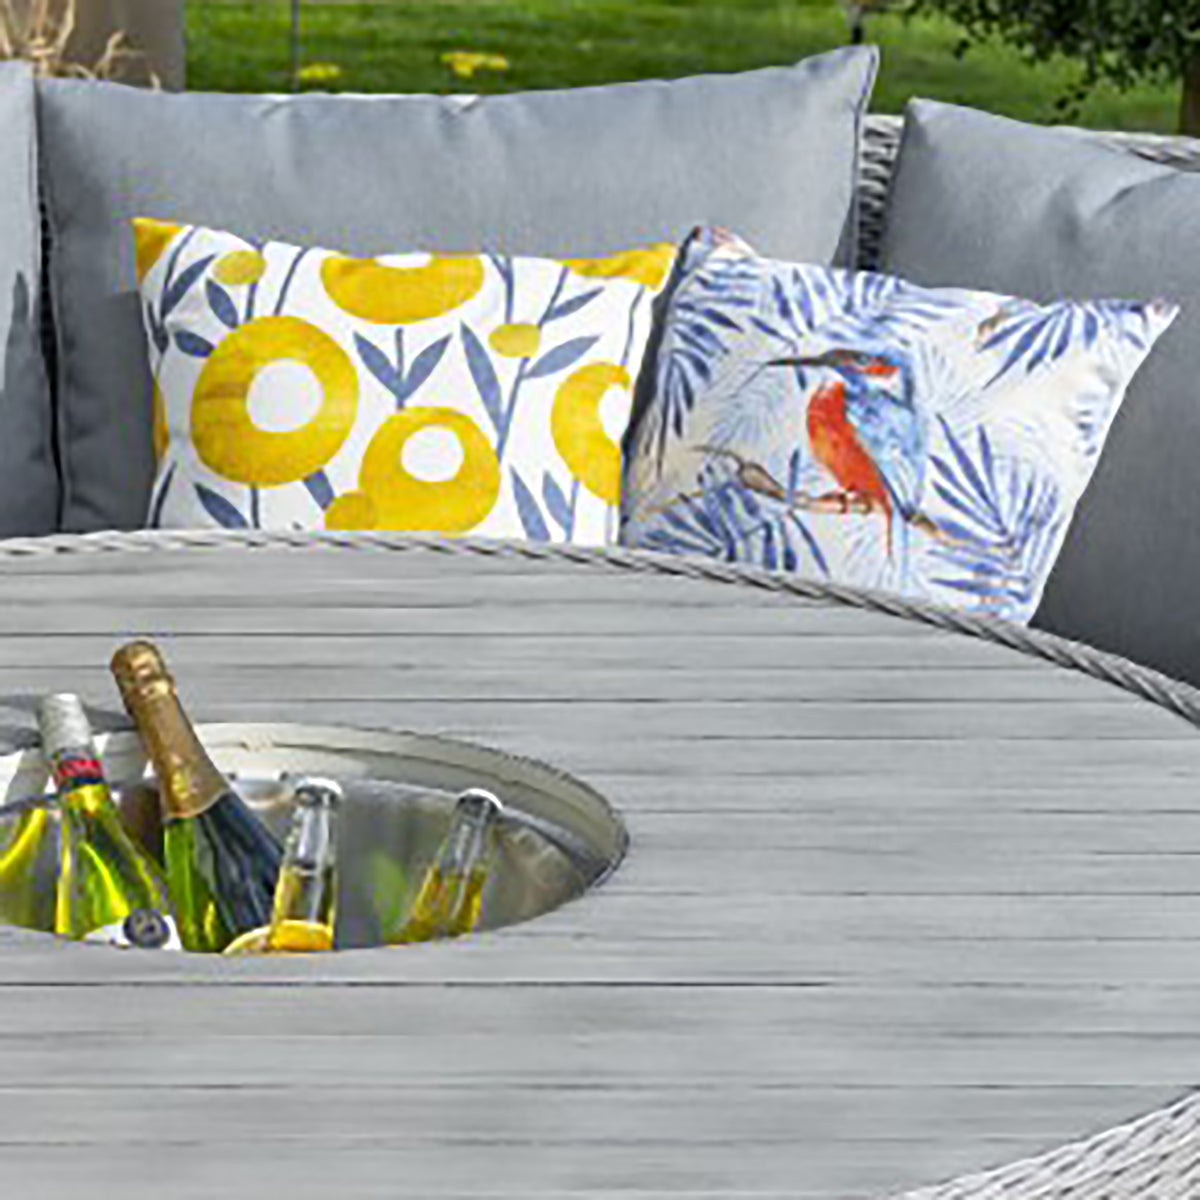 LG Outdoor Kingfishers Scatter Cushion